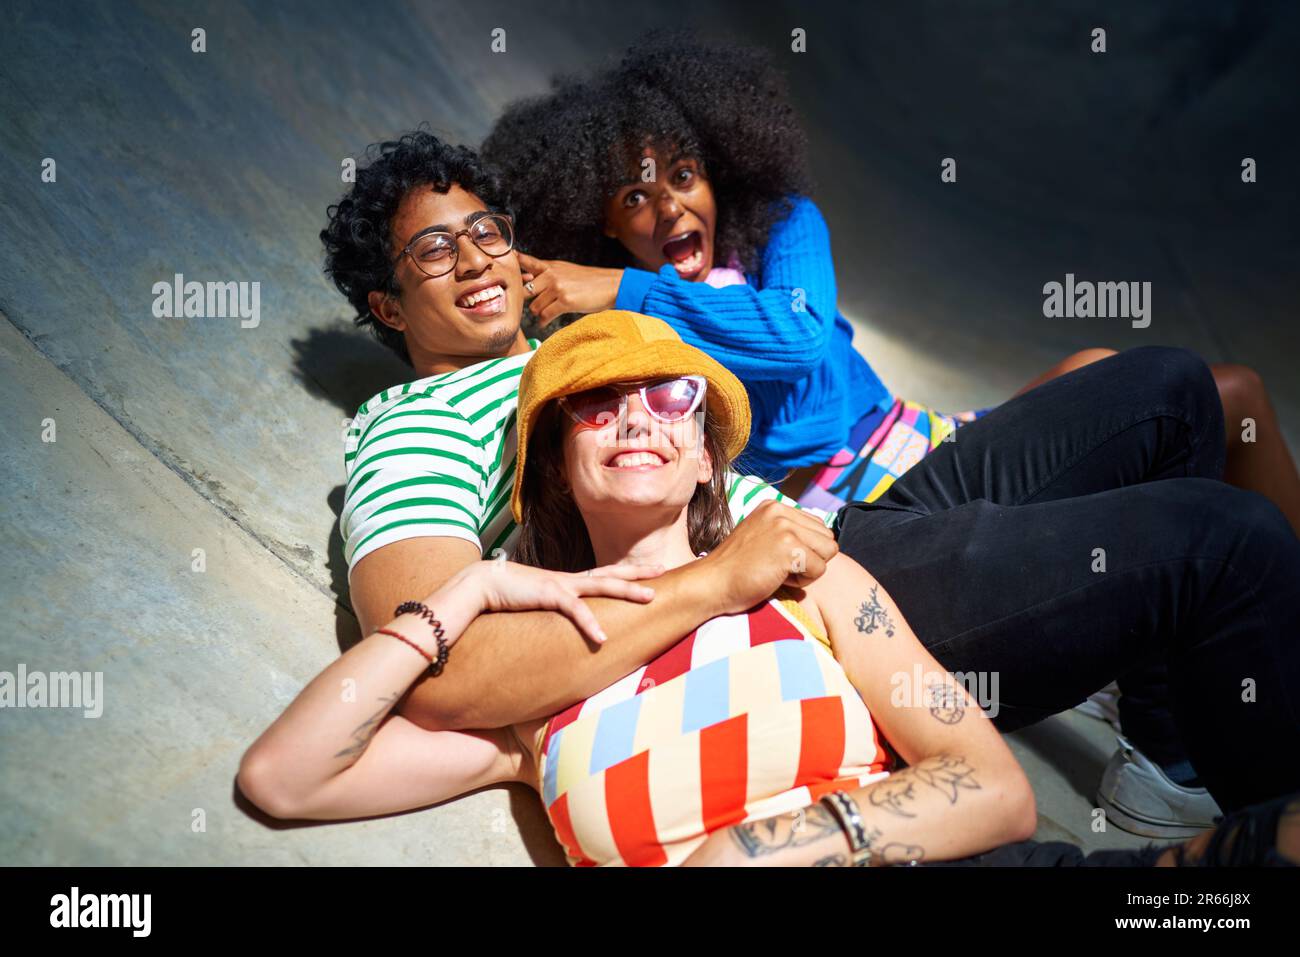 Portrait happy, carefree young friends laying on sports ramp Stock Photo